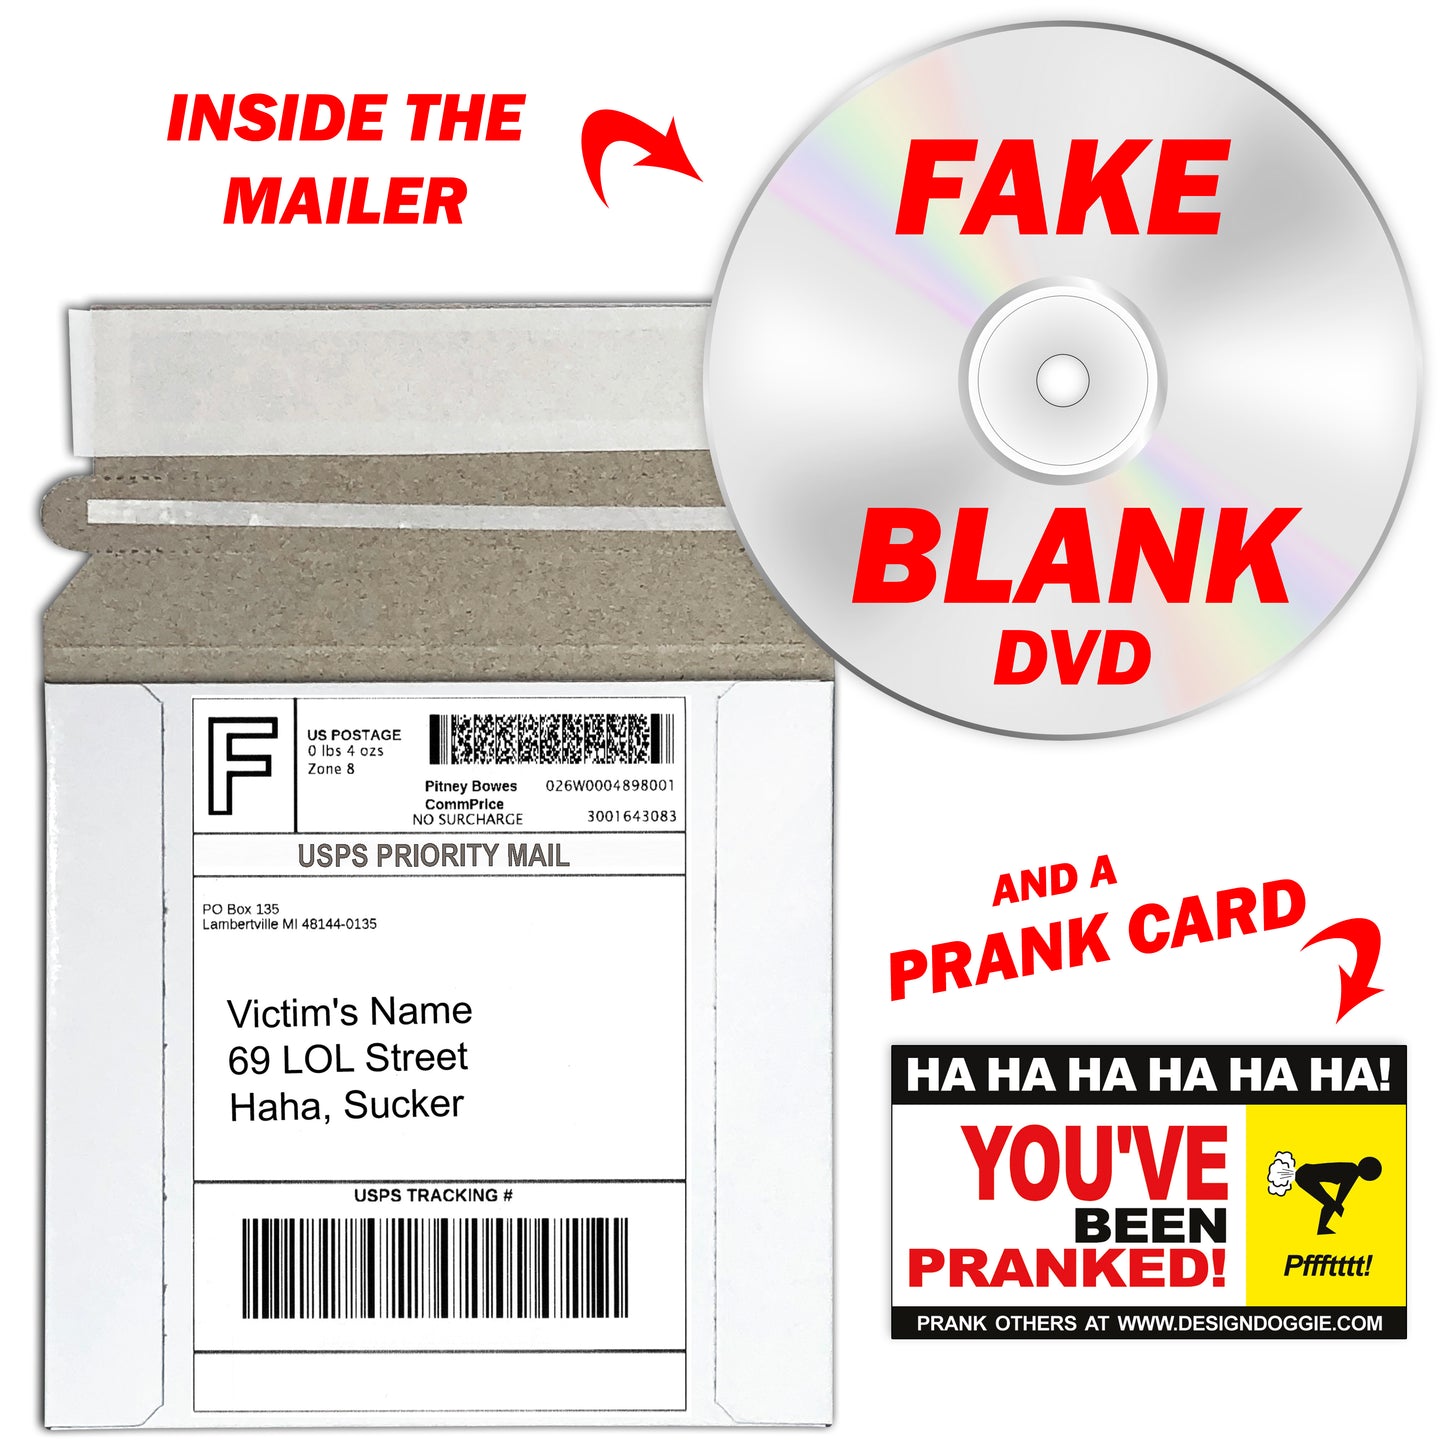 Cursing Parrots Fake DVD mail prank gets sent directly to your victims 100% anonymously!